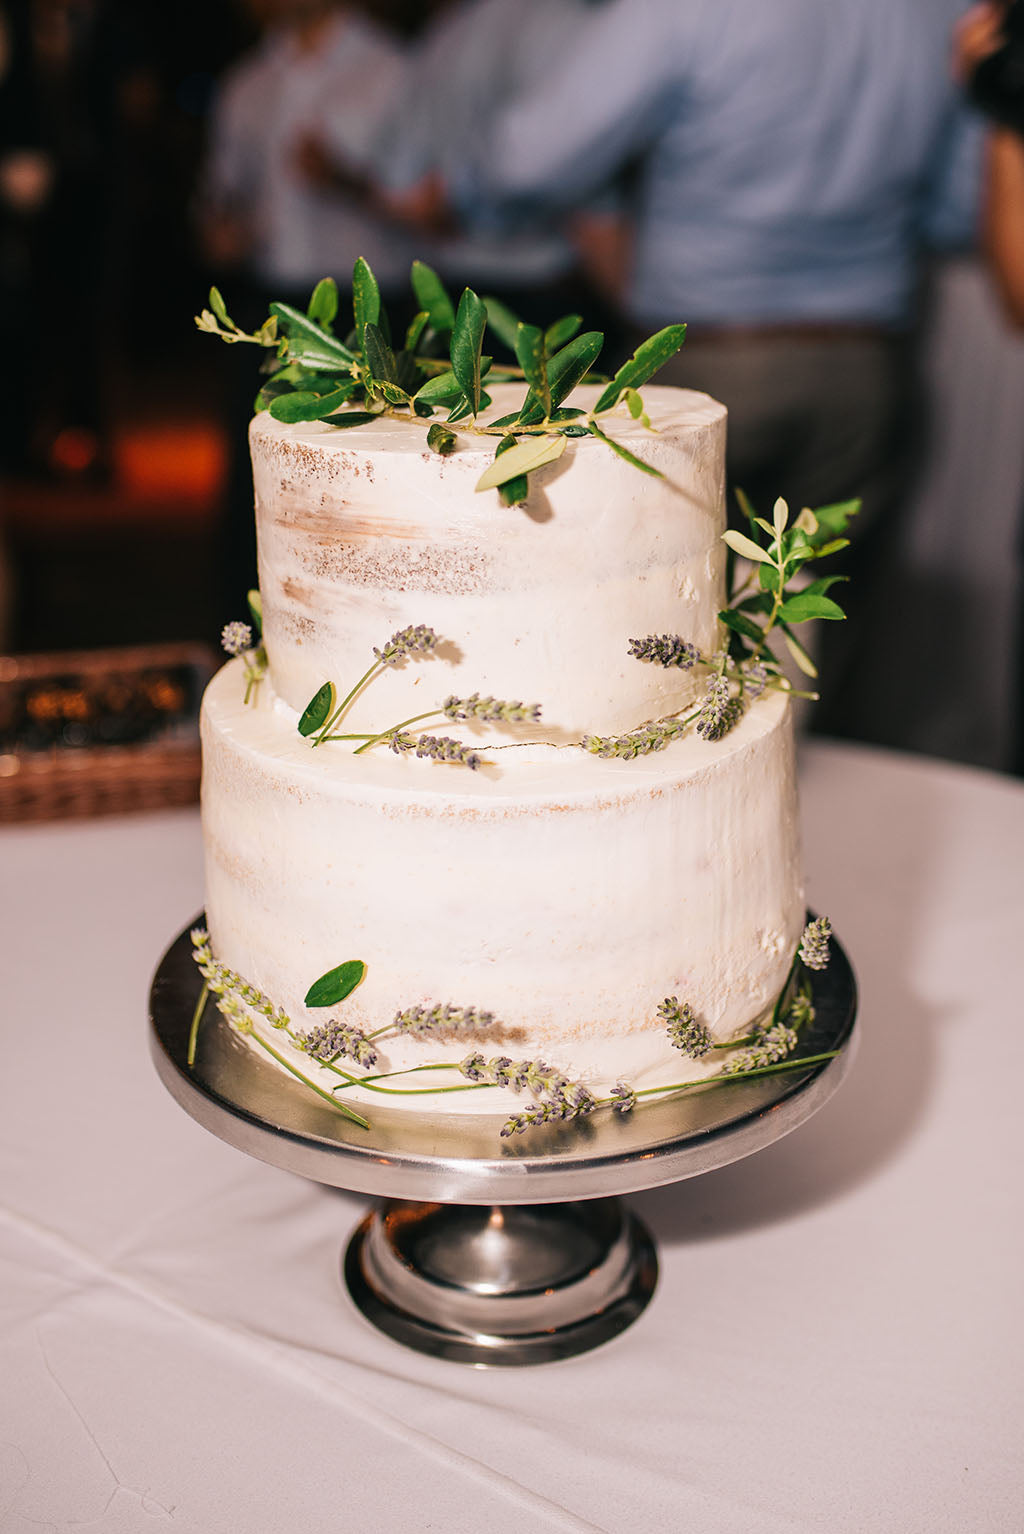 naked cake with olive branch leaves